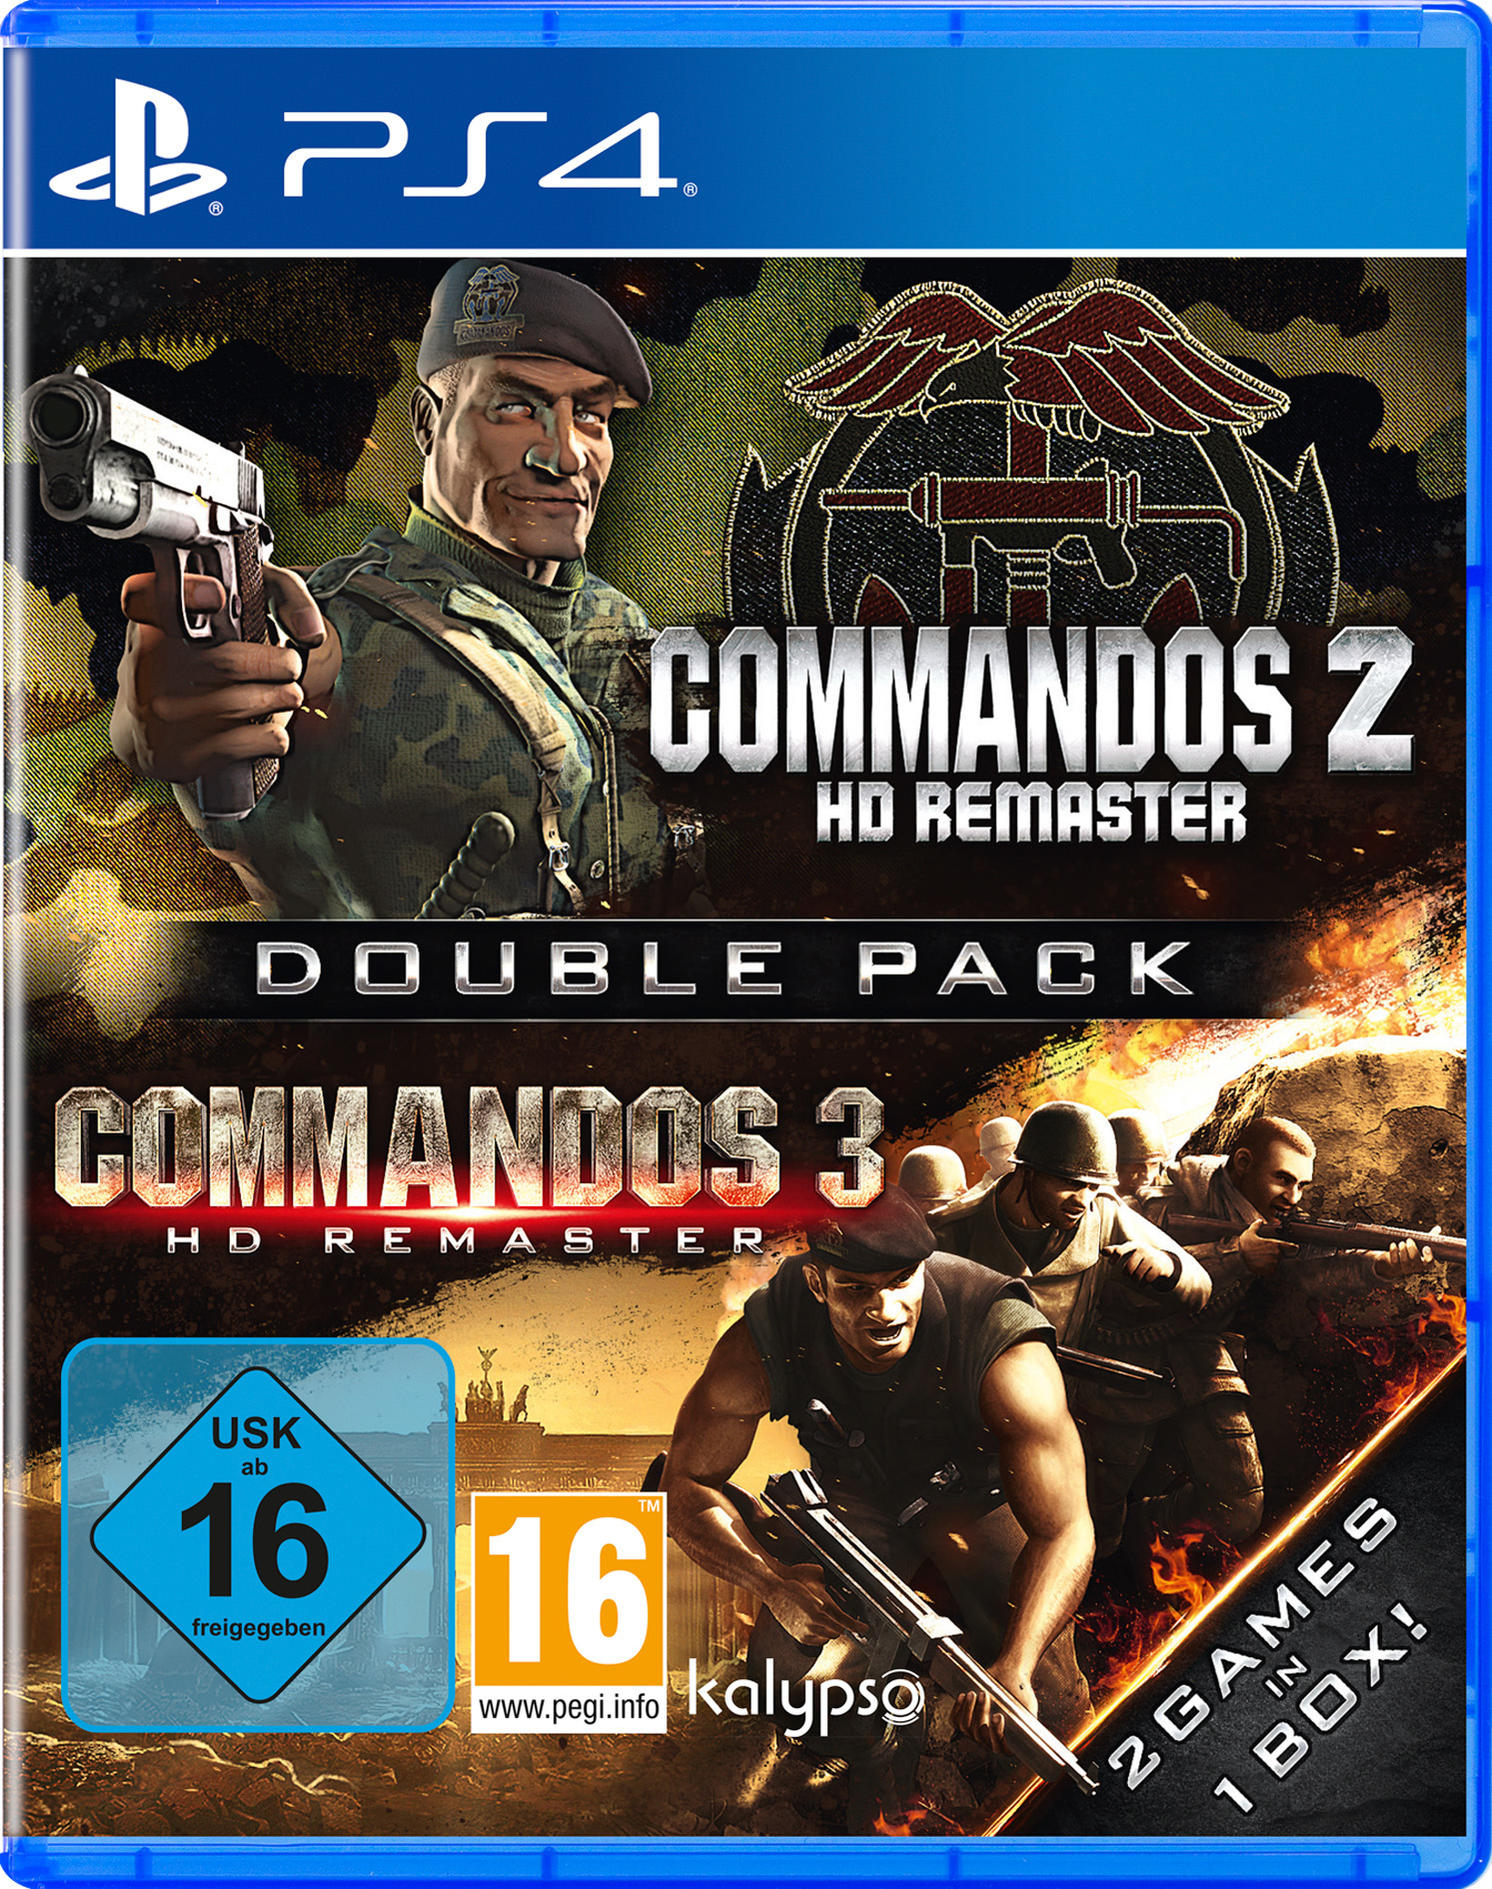 PS4 COMMANDOS 2&3 (HD REMASTER DOUBLE - 4] PACK) [PlayStation